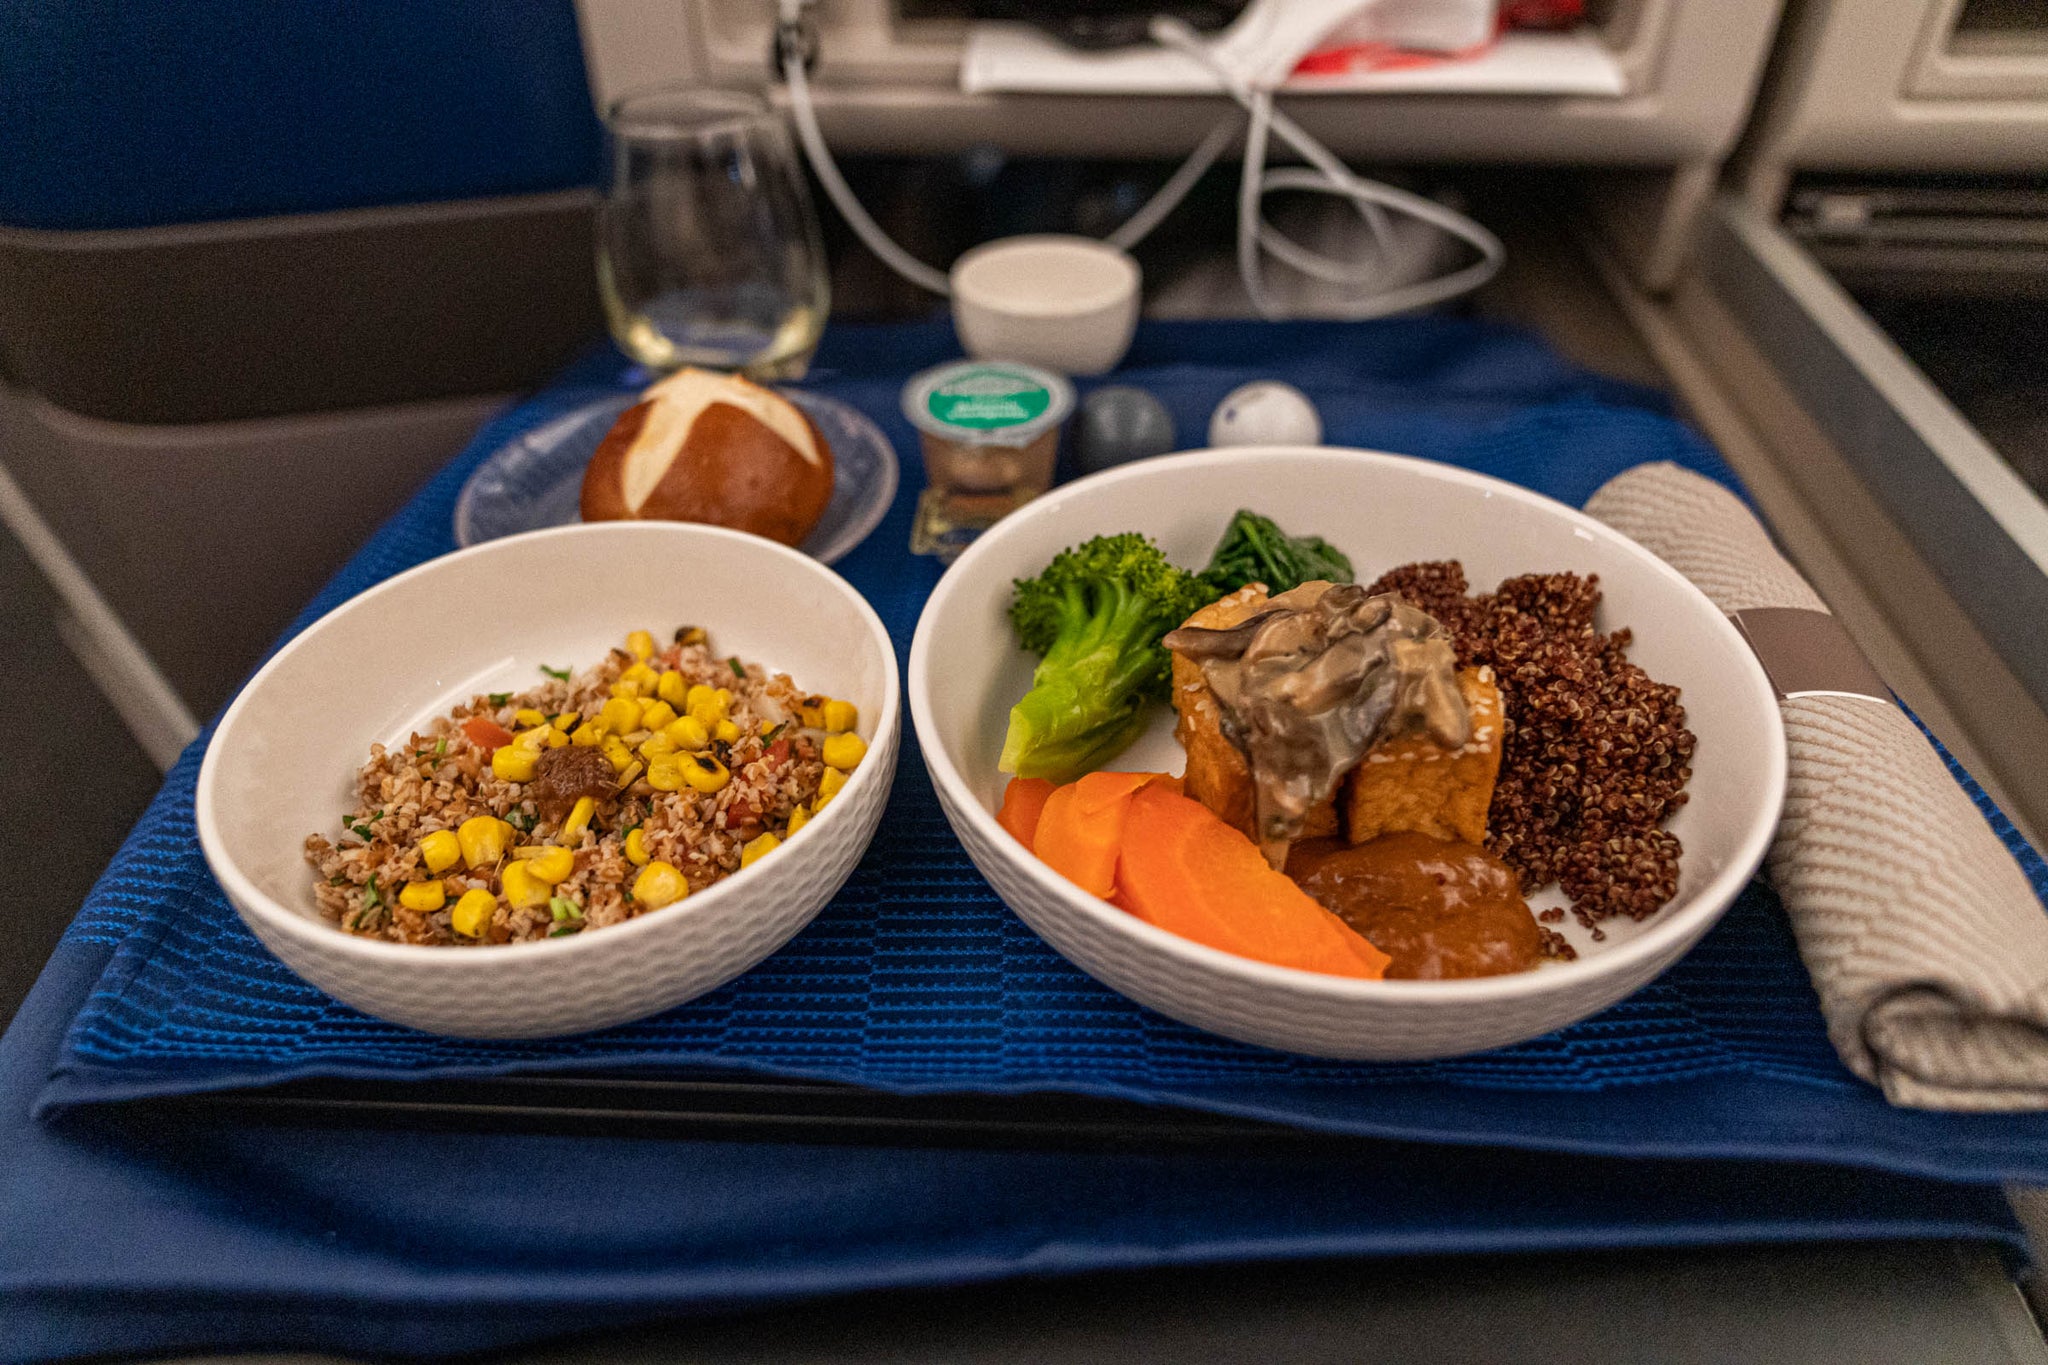 United finally expands its domestic firstclass meal service The